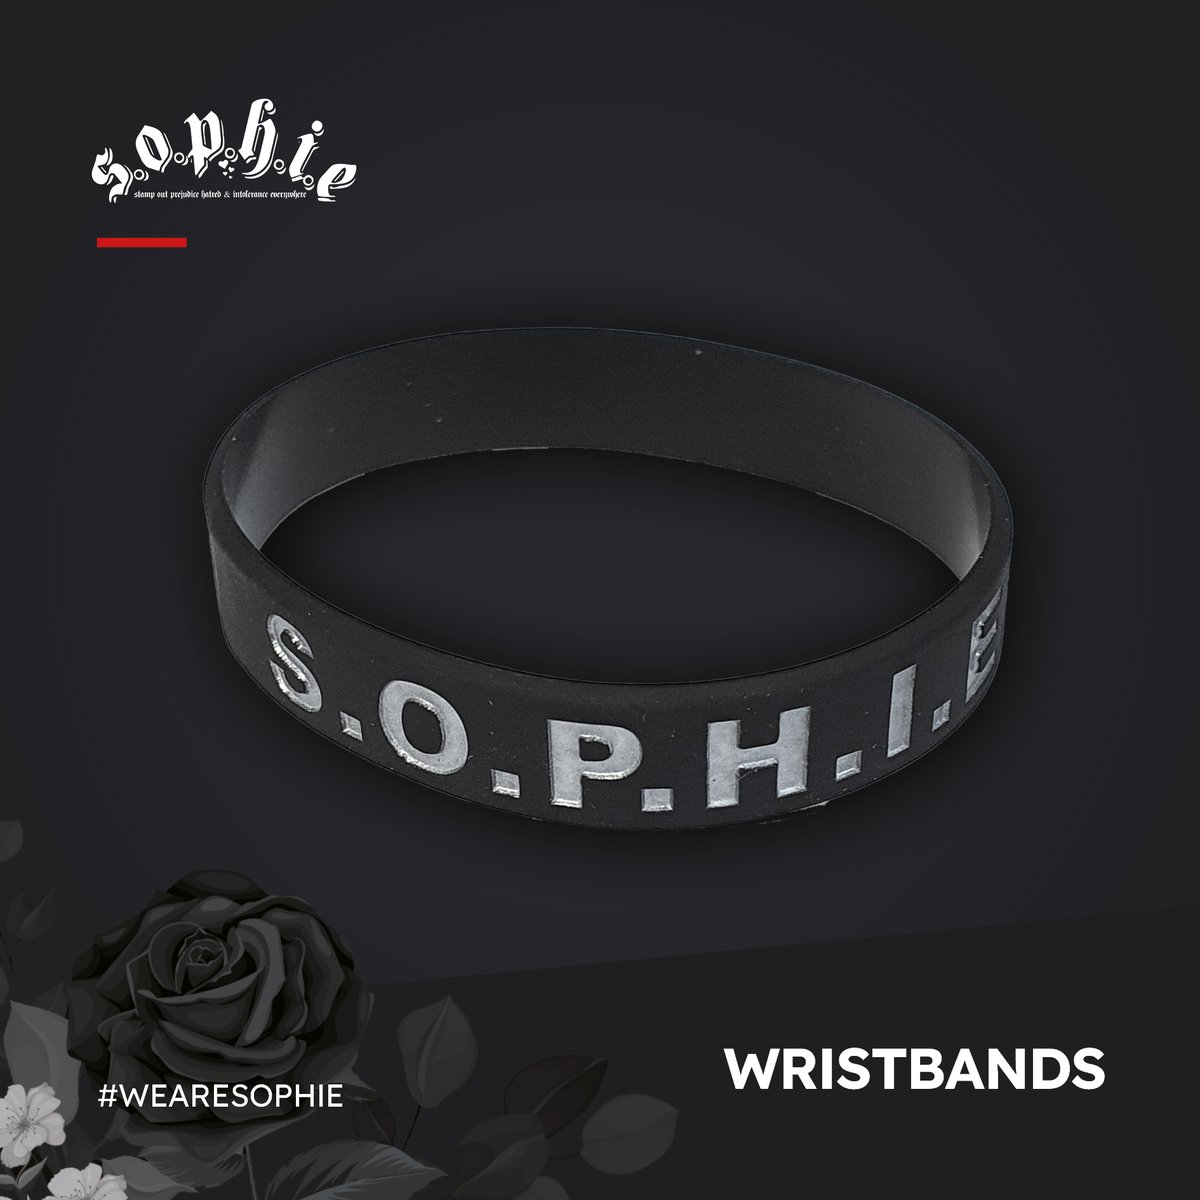 Show you're part of the community with a SOPHIE wristband, available in youth size too 🖤 #wearesophie …ncasterfoundation.backstreetmerch.com/wristbands